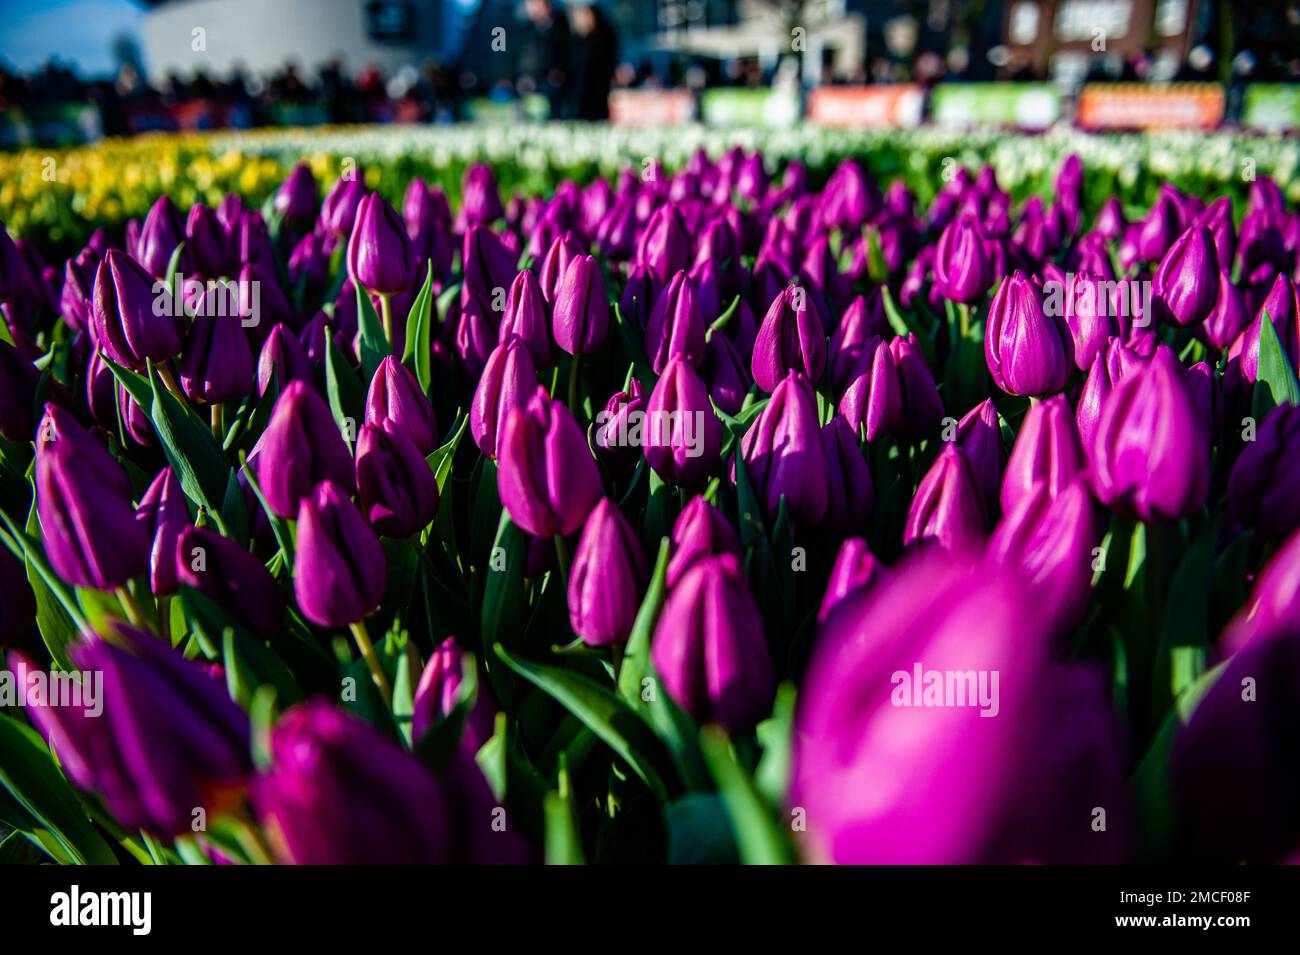 General view of hundreds of purple tulips. Each year on the 3rd Saturday of January, the National Tulip Day is celebrated in Amsterdam. Dutch tulip growers built a huge picking garden with more than 200,000 colorful tulips at the Museumplein in Amsterdam. Visitors are allowed to pick tulips for free. The event was opened by Olympic skating champion, Irene Schouten. Prior to the opening, she christened a new tulip: Tulipa 'Dutch Pearl' as a reference to the world - famous painting 'The girl with a pearl earring' by Johannes Vermeer. (Photo by Ana Fernandez/SOPA Images/Sipa USA) Stock Photo